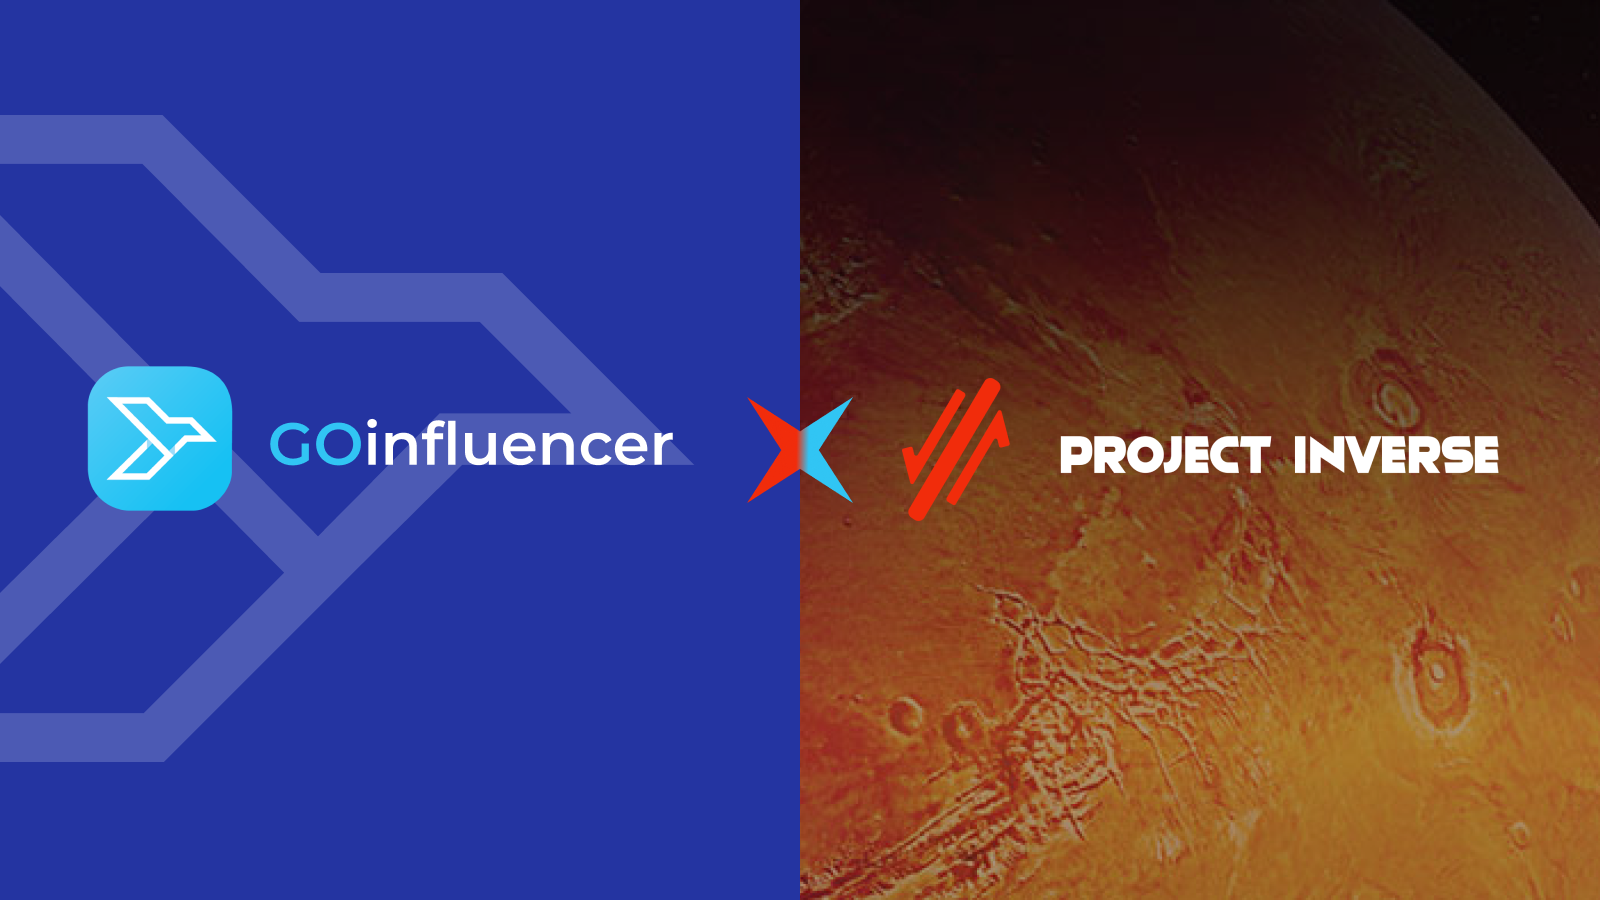 GOinfluencer partnership announcement with Project Inverse